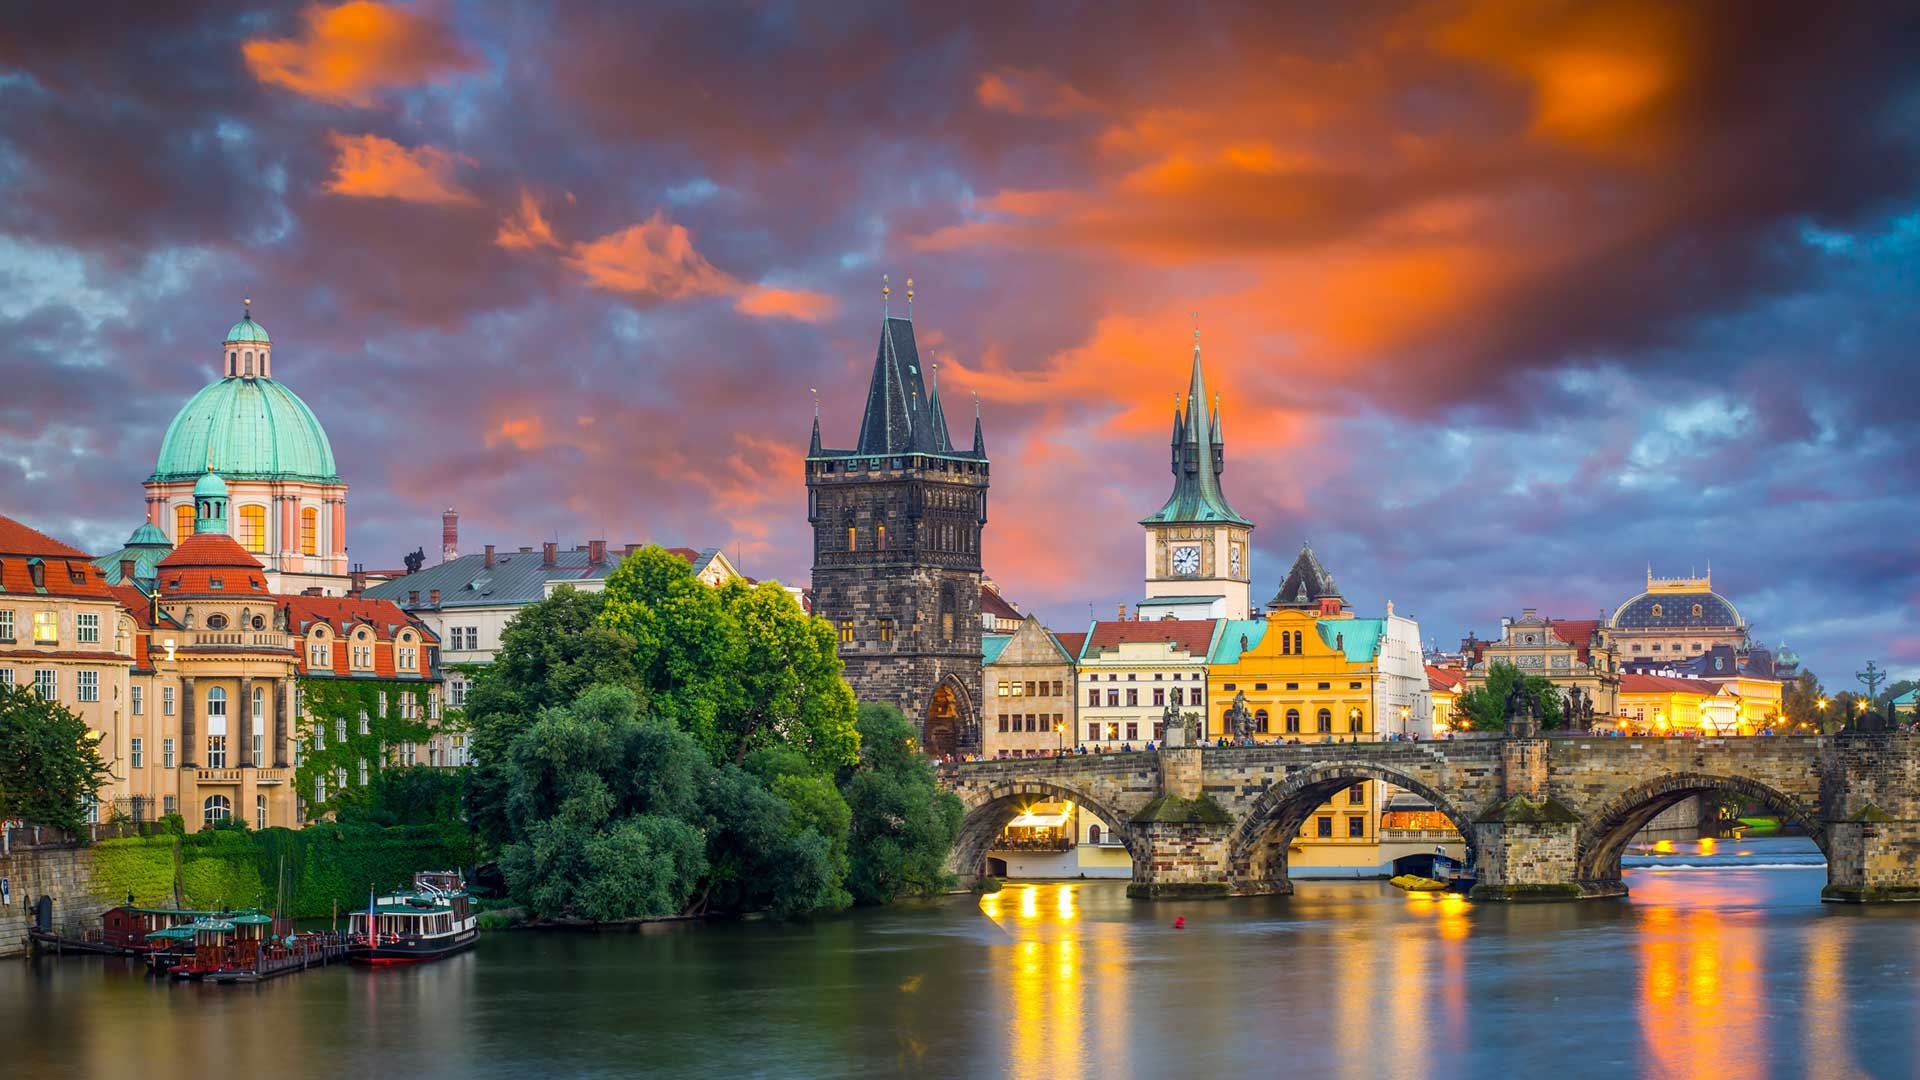 Czechia (Czech Republic): The Vltava River, Runs from south to north for 430 kilometers across the country. 1920x1080 Full HD Background.